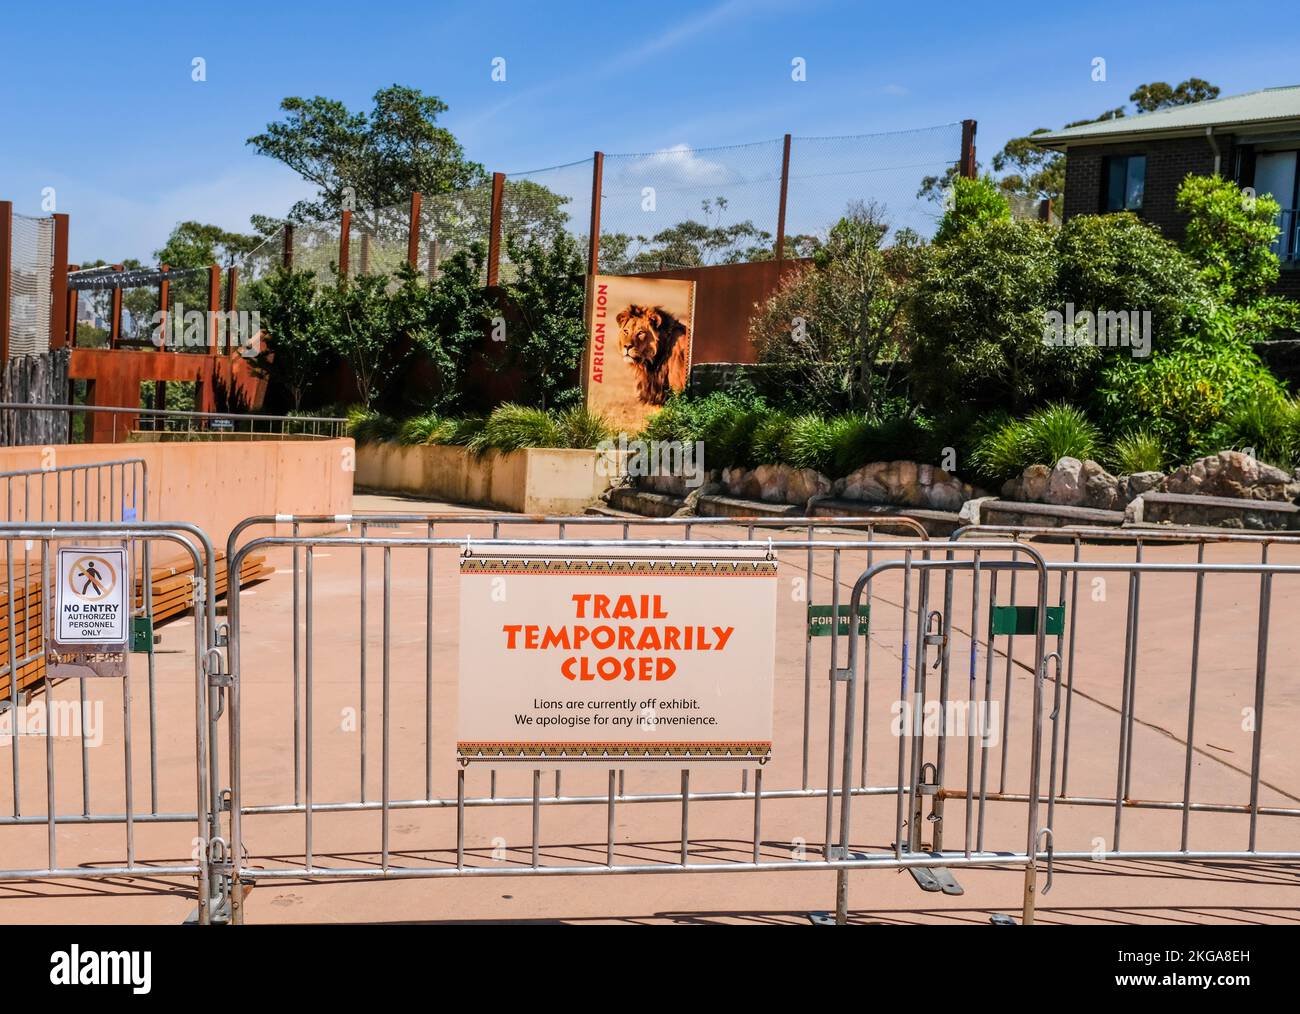 Lions escape from Taronga Zoo, Sydney Australia, Wednesday 9th November 2022. Fences and signs after escape of lions at Zoo. Stock Photo